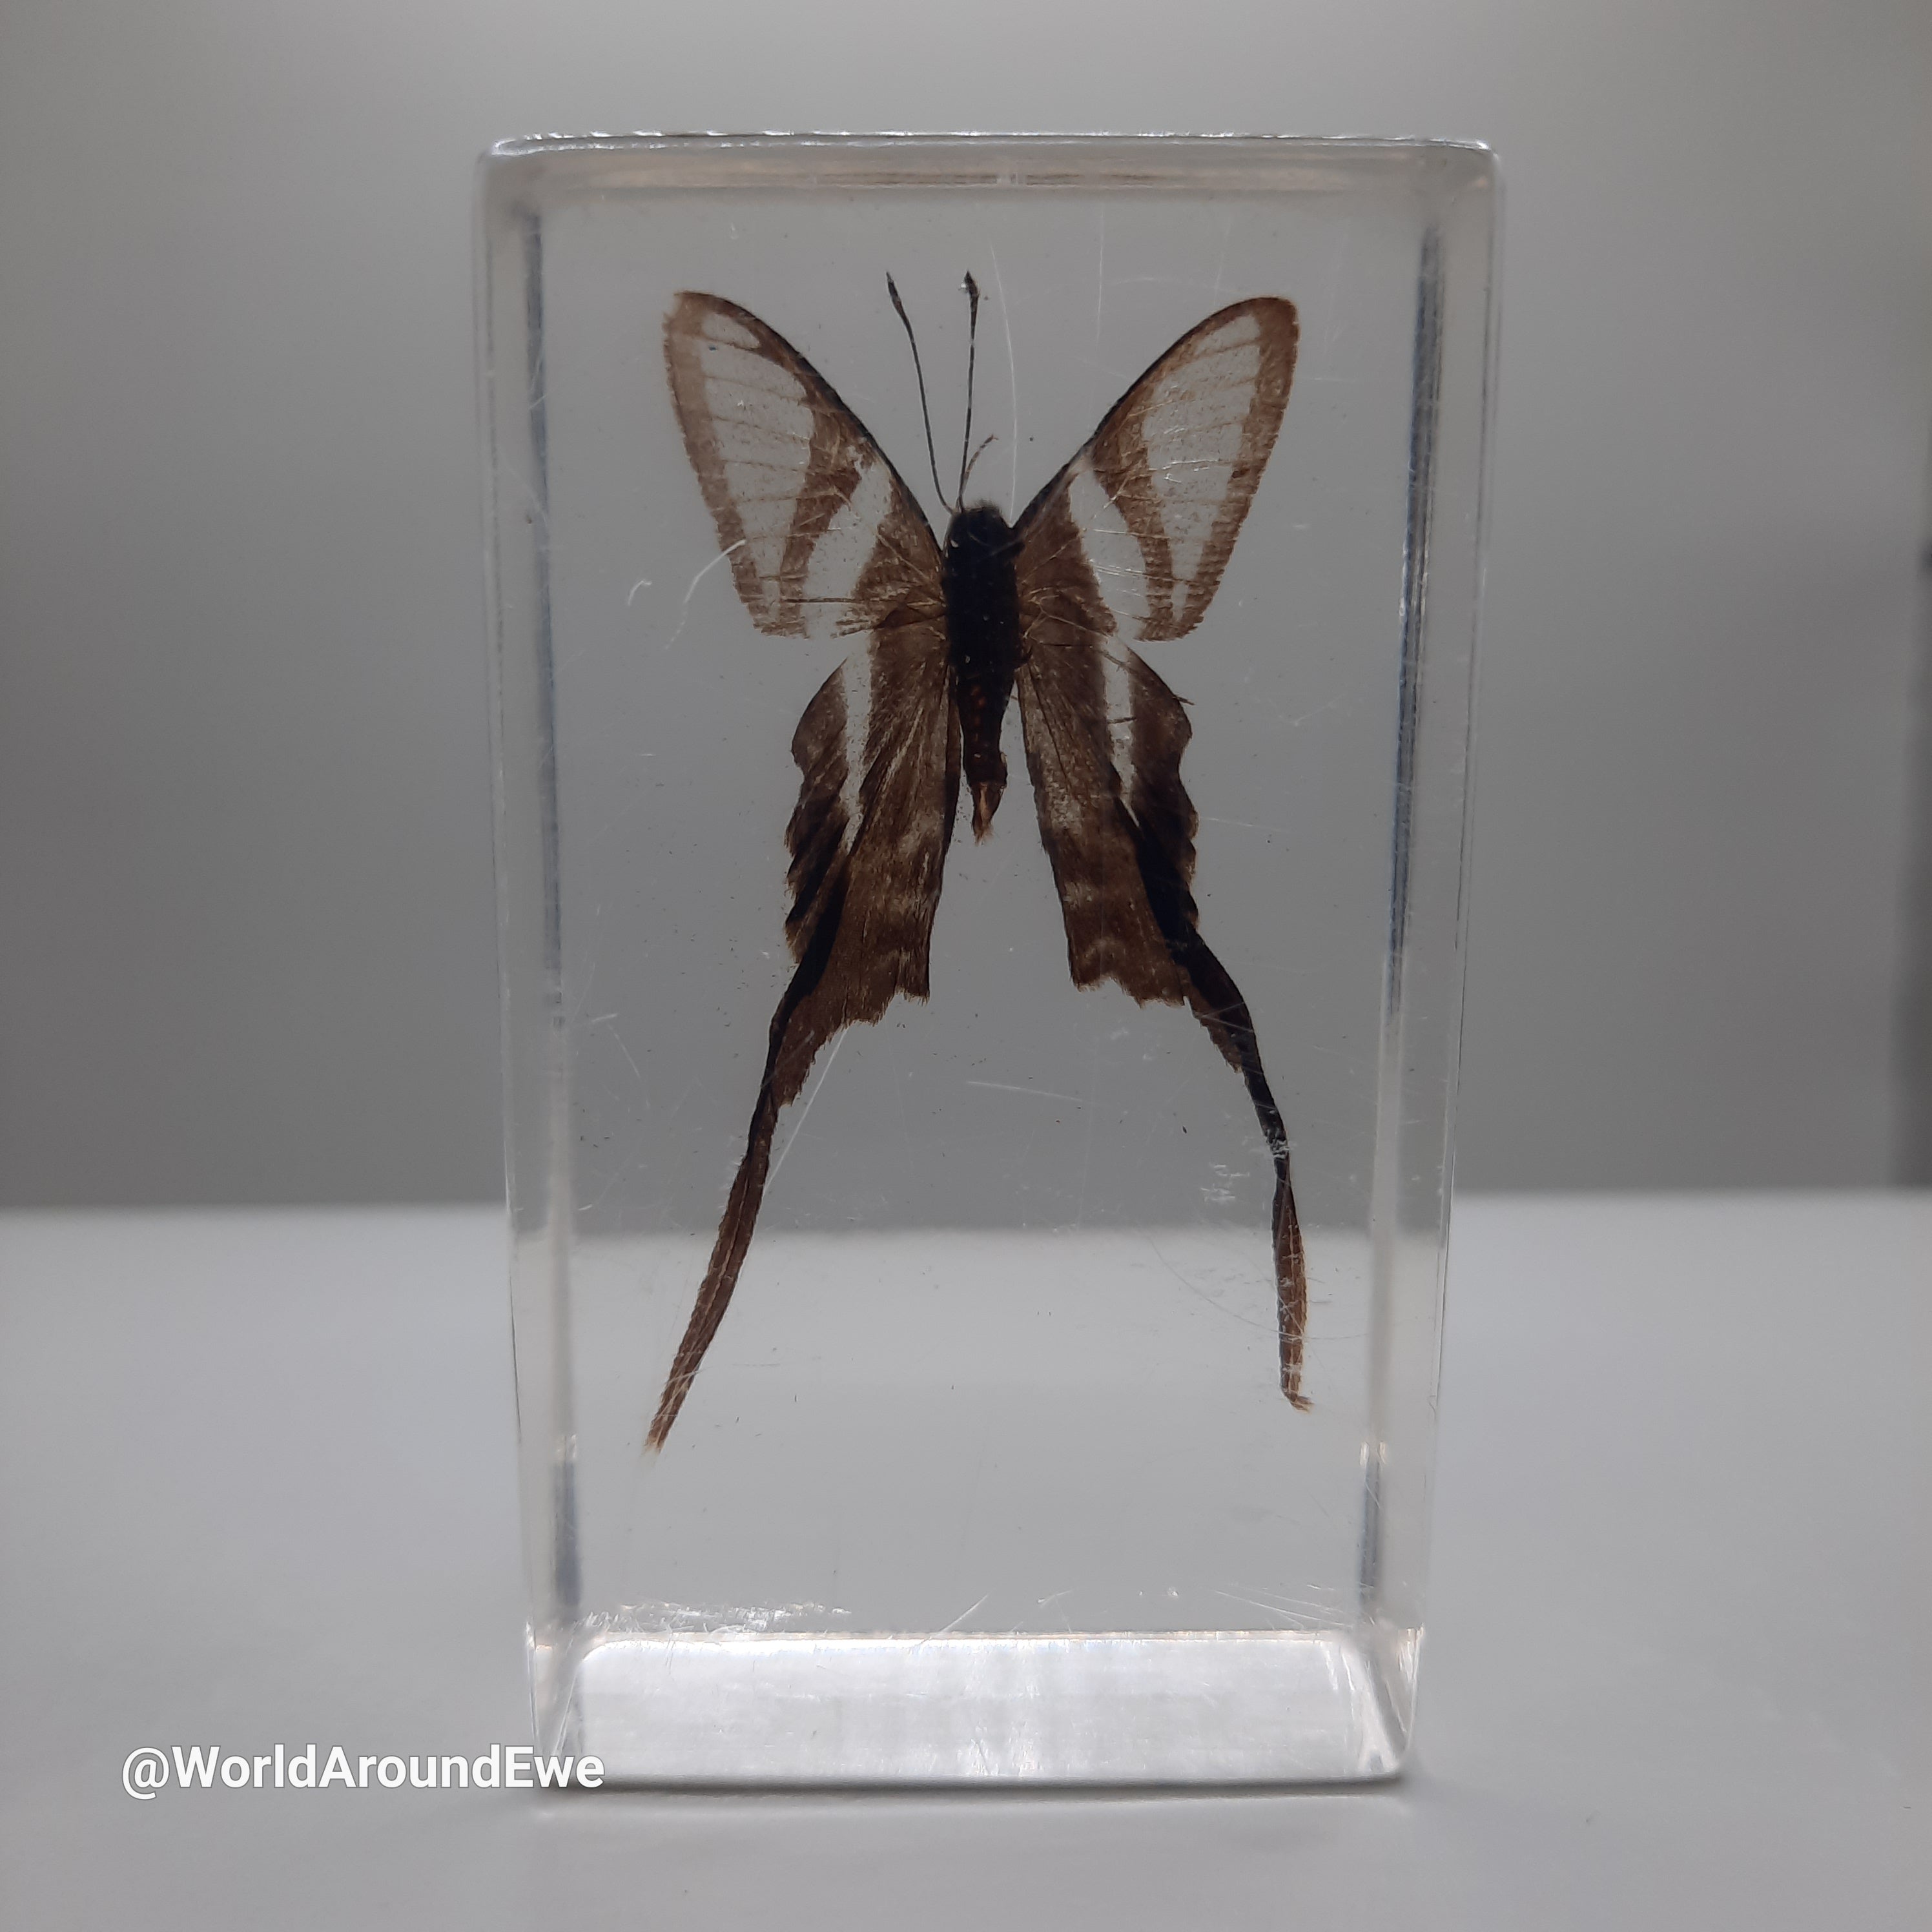 Insect specimens